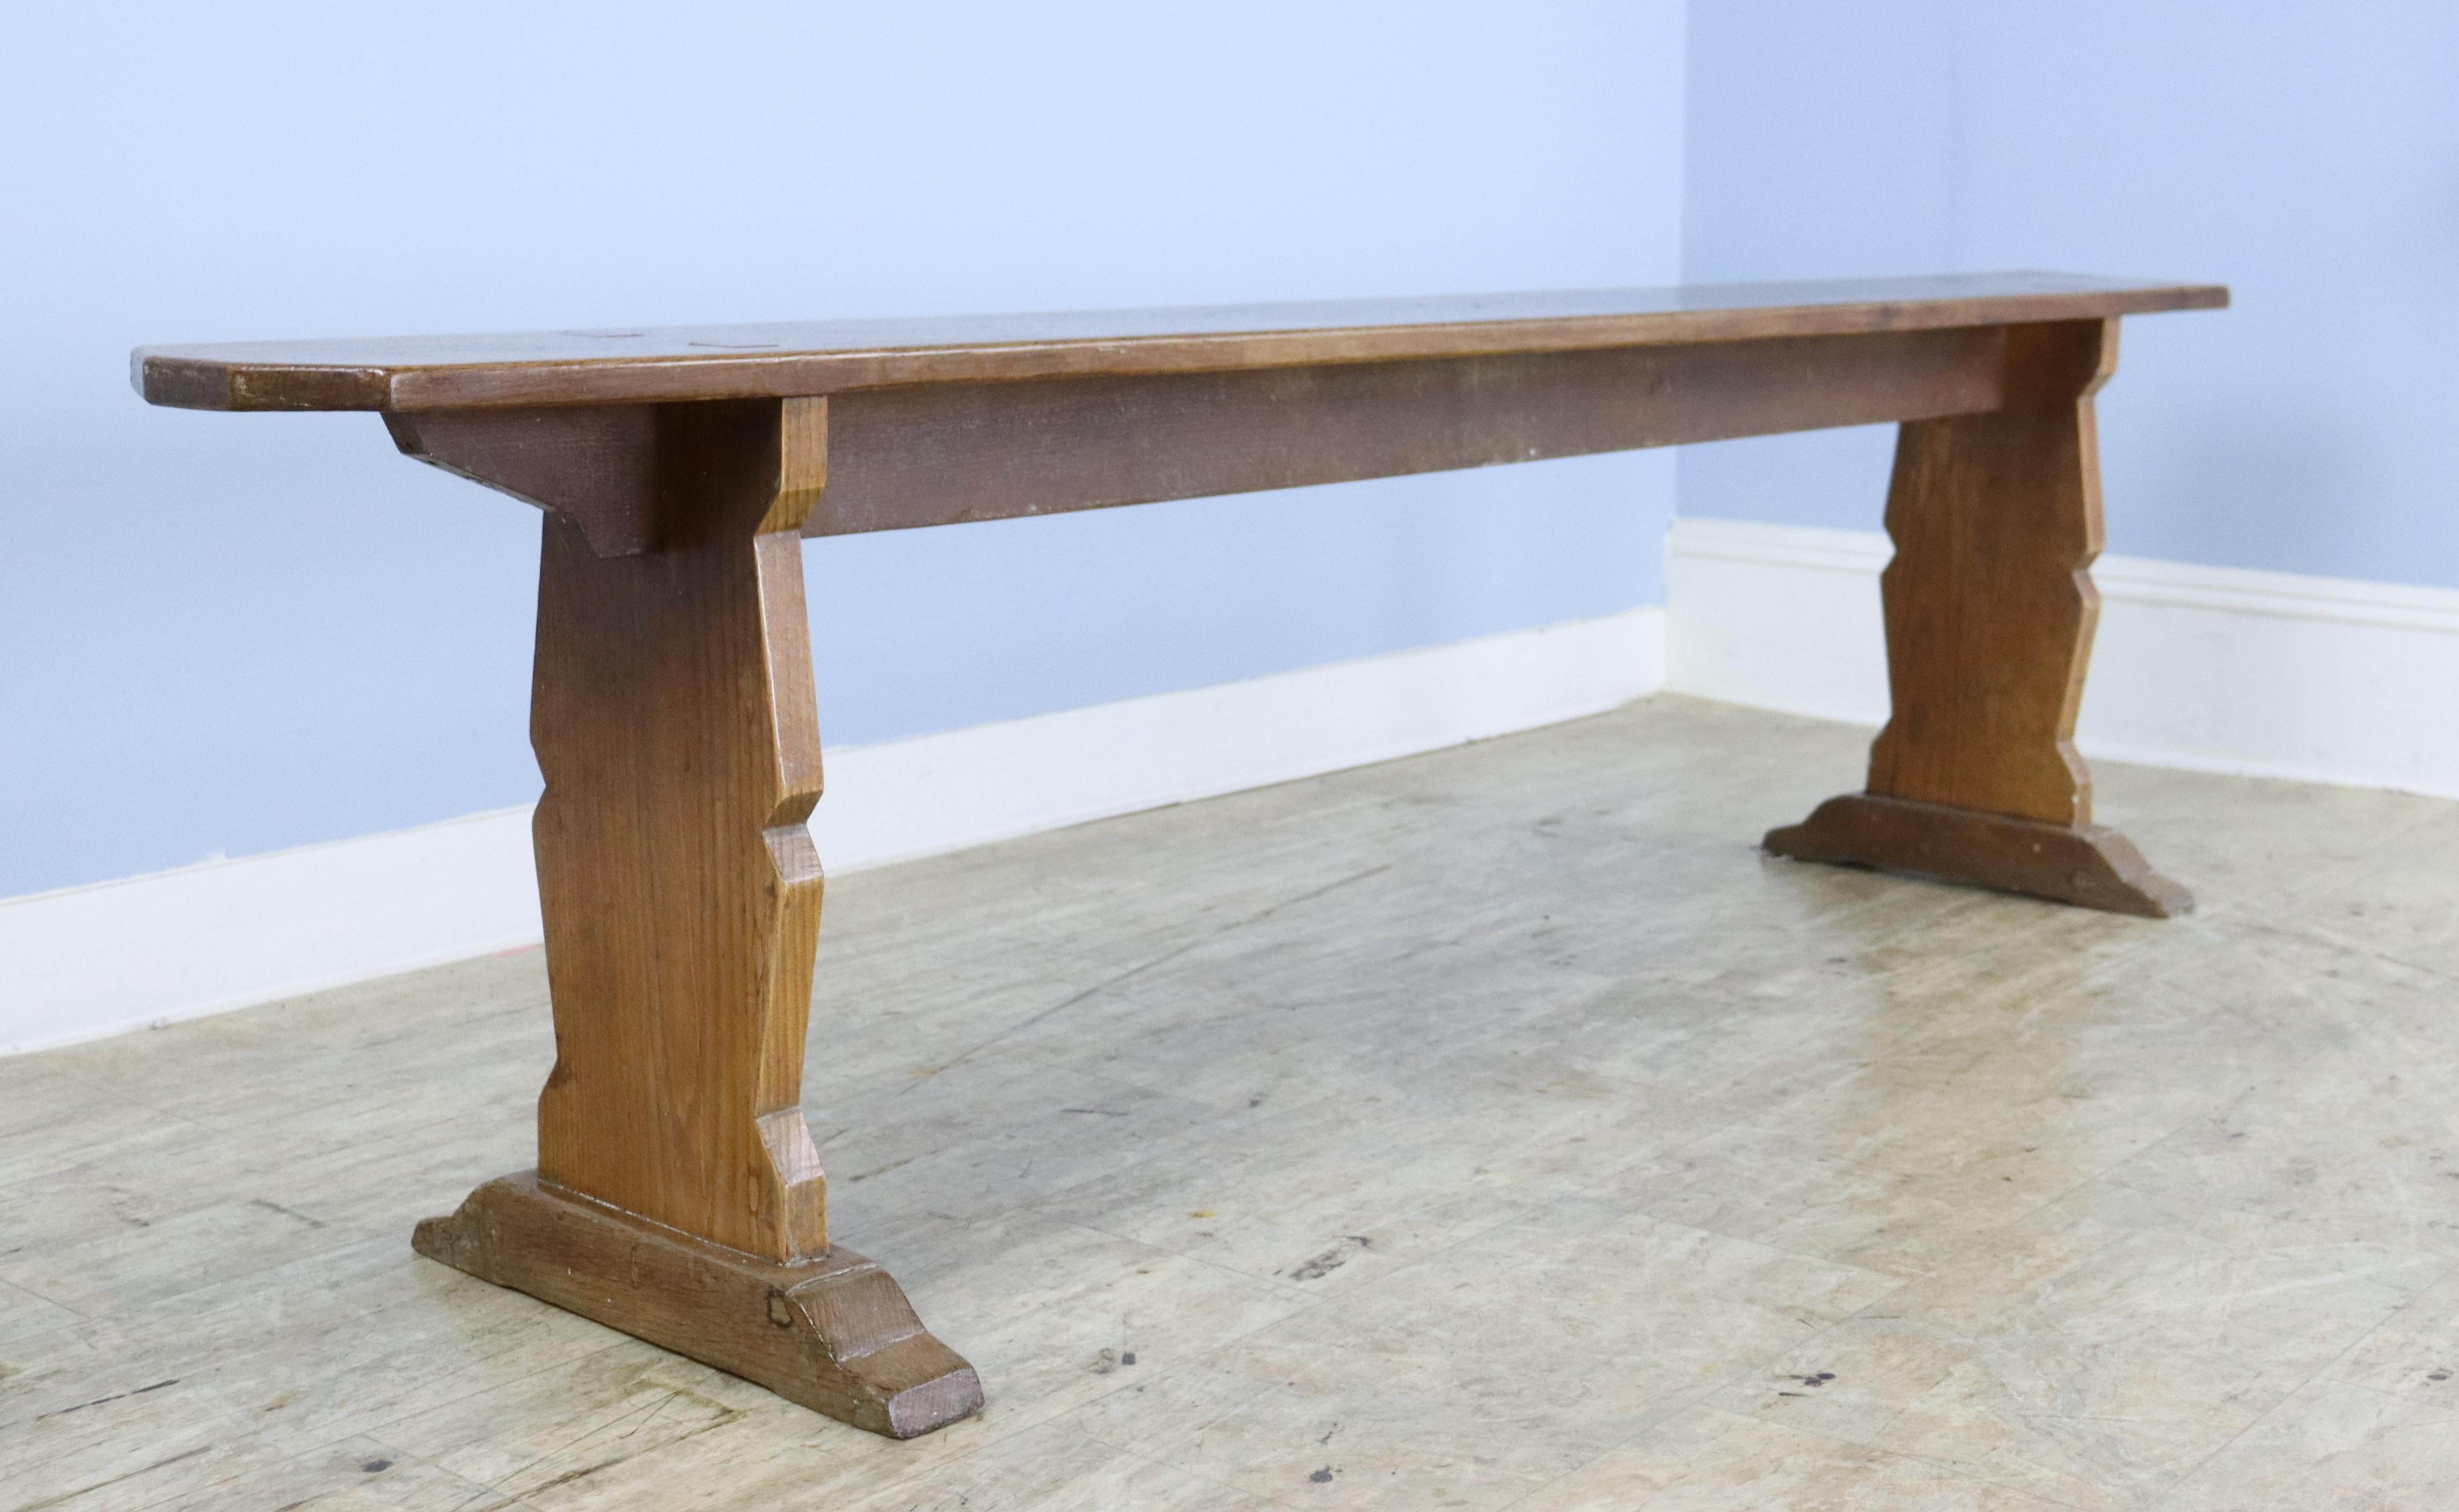 A pair of antique oak benches to put alongside a farm table or provide seating in any room. These two are in very good antique condition with very nice color and patina. Sturdy with good seating height. At 78.5 inches, can fit three people